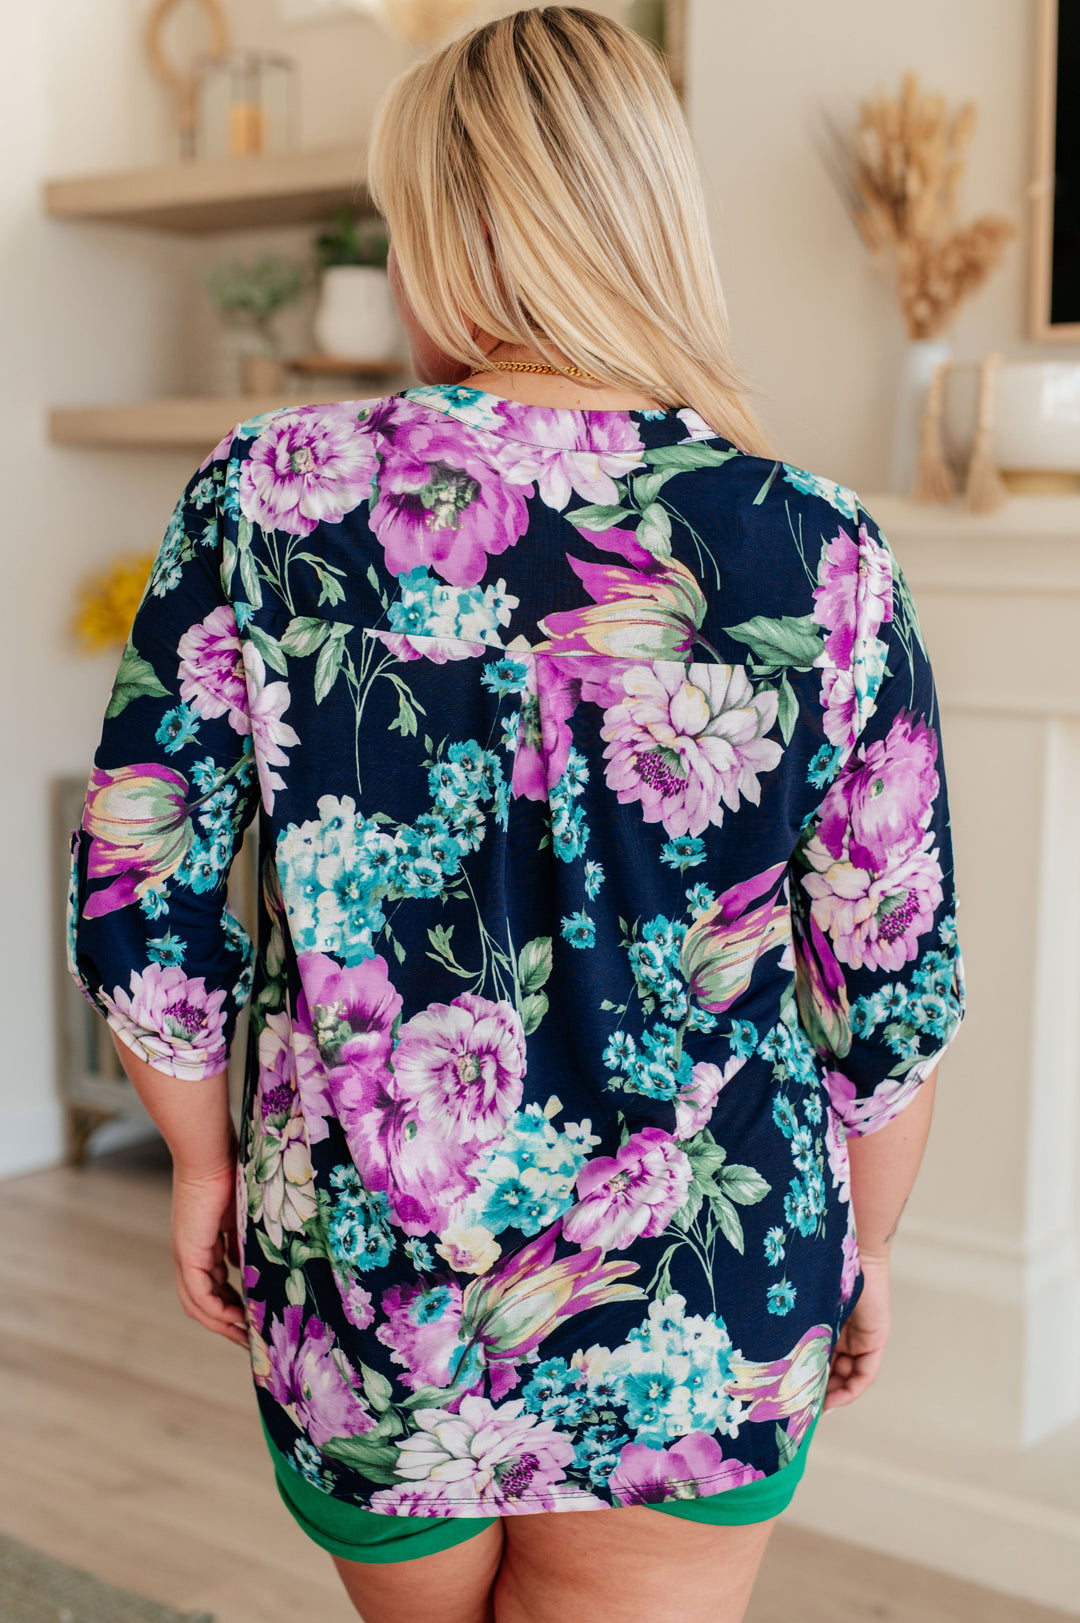 Chic & Easy 3/4 Sleeve Top - Navy and Purple Floral